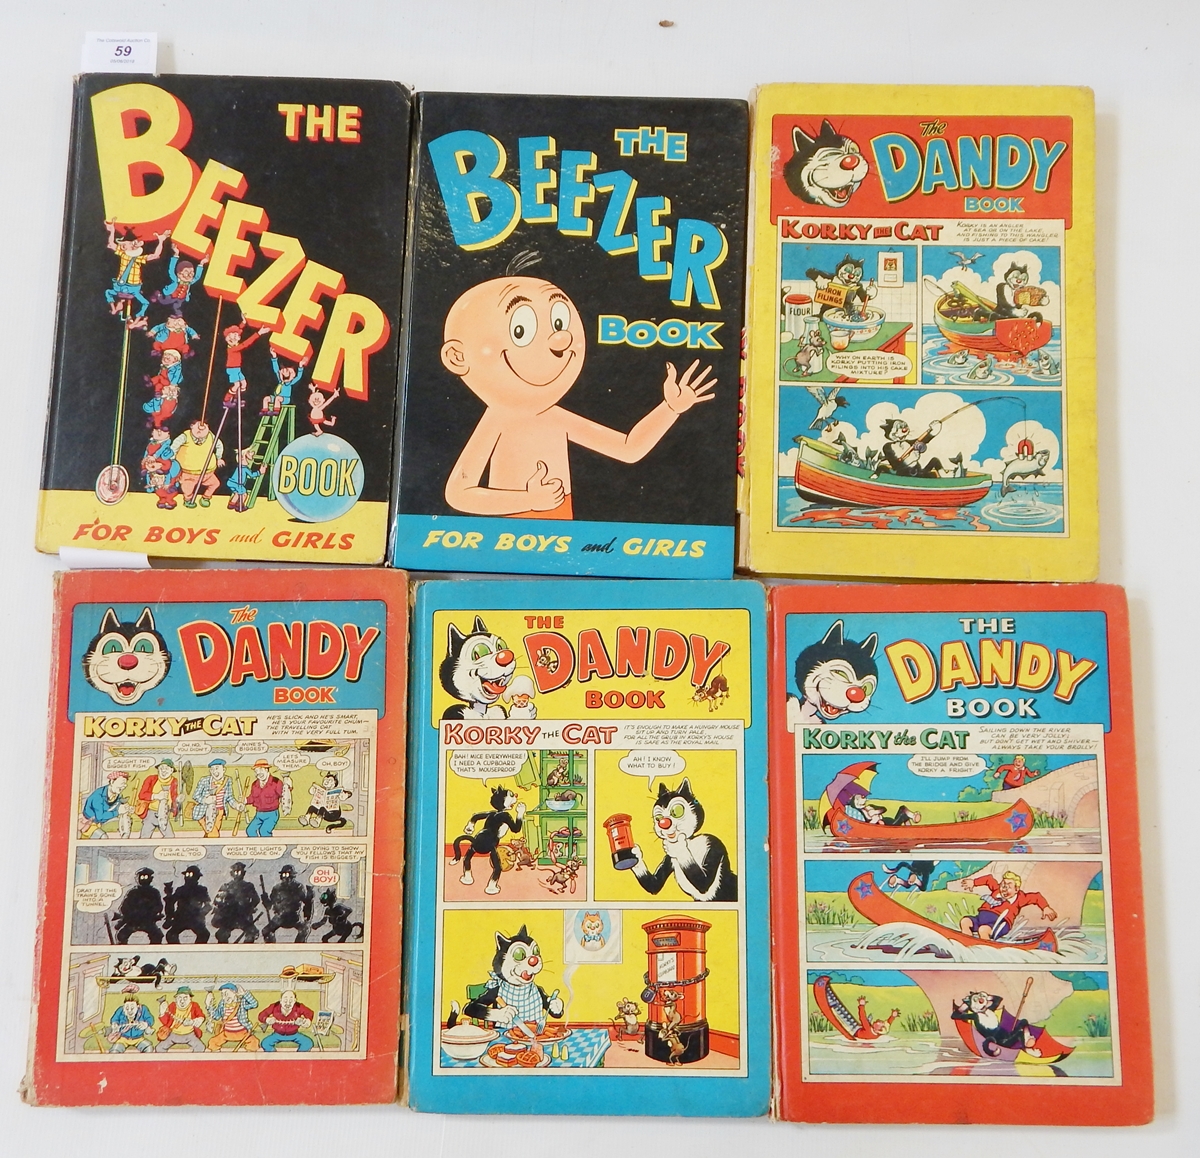 Various annuals including Beezer x 2, The Dandy Book x 4, The Beano x 1,